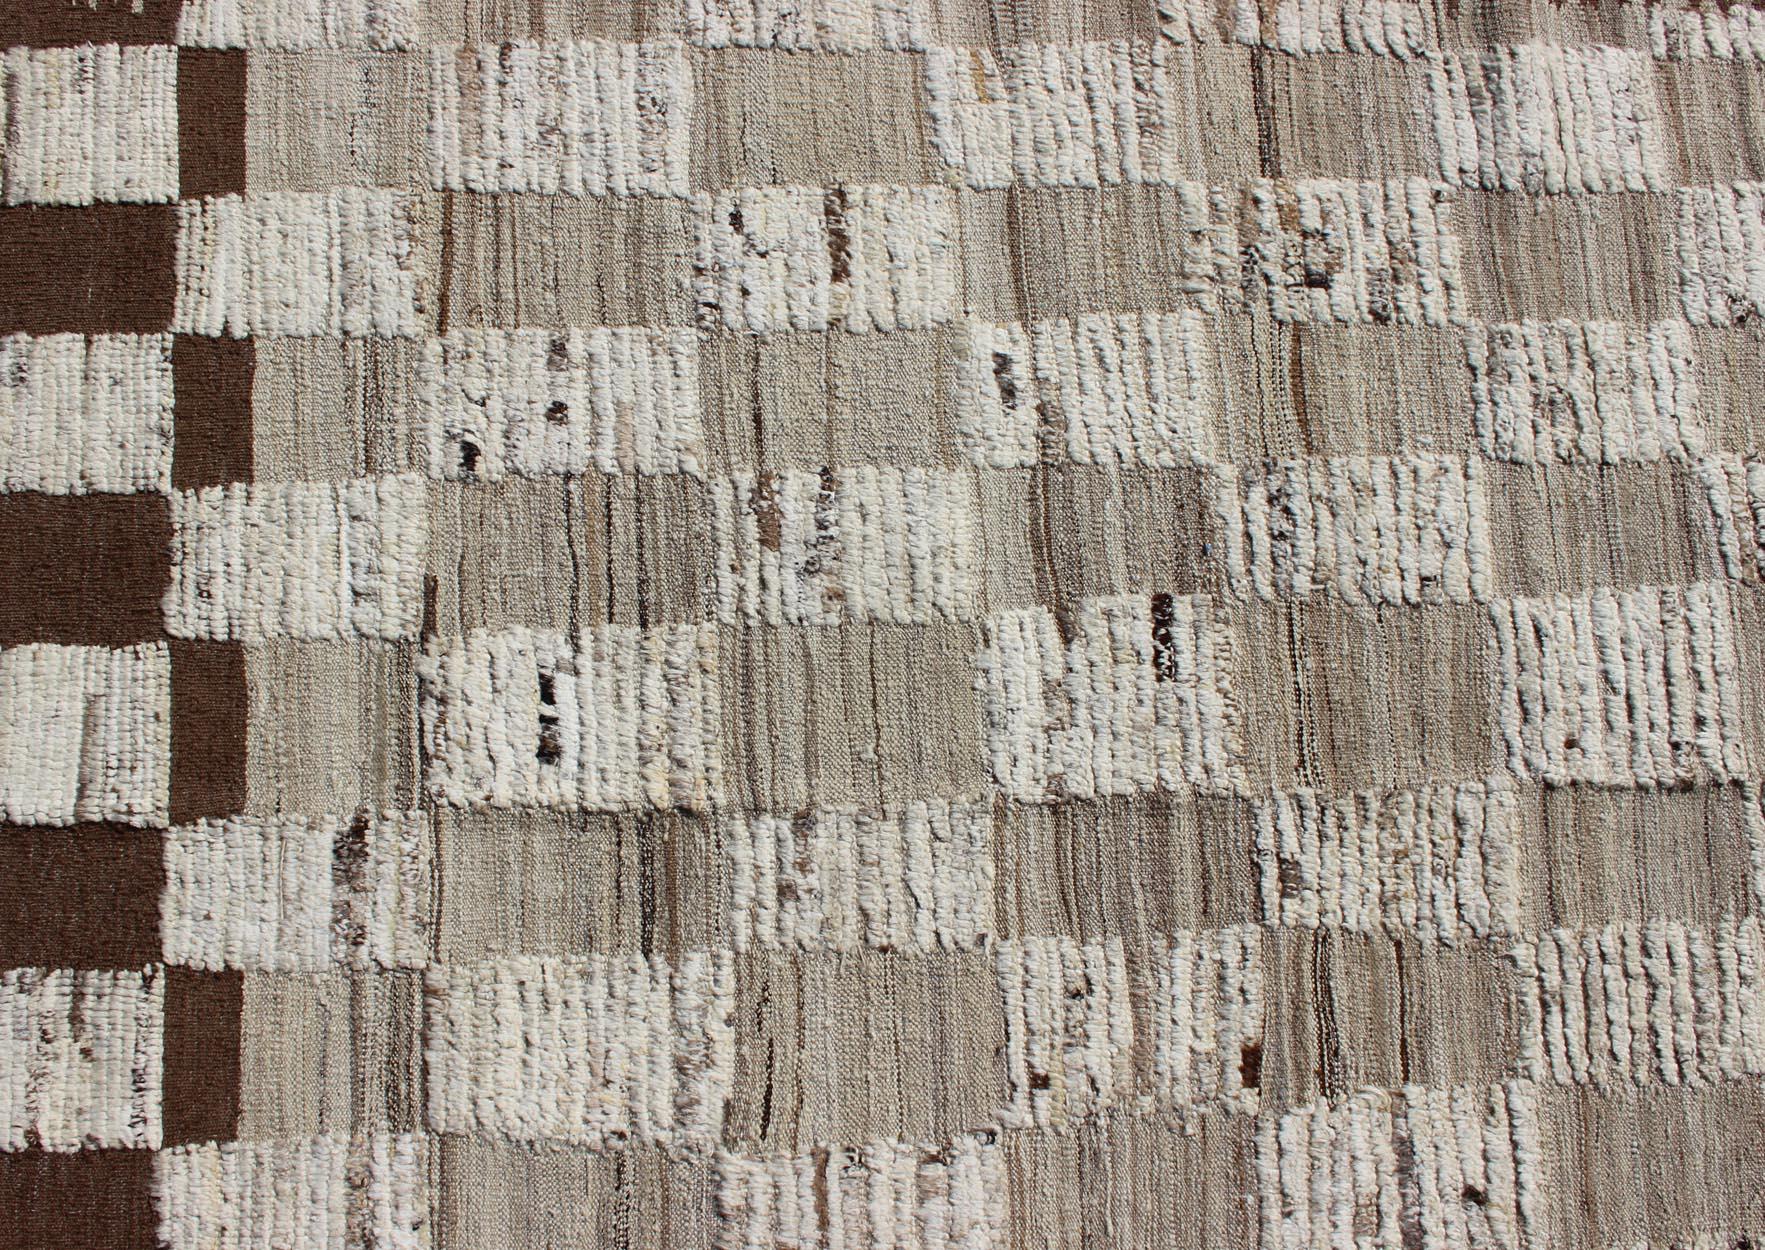 Hand-Woven Hi-Low Piled Rug With Checkerboard Design in Earth Tones by Keivan Woven Arts For Sale